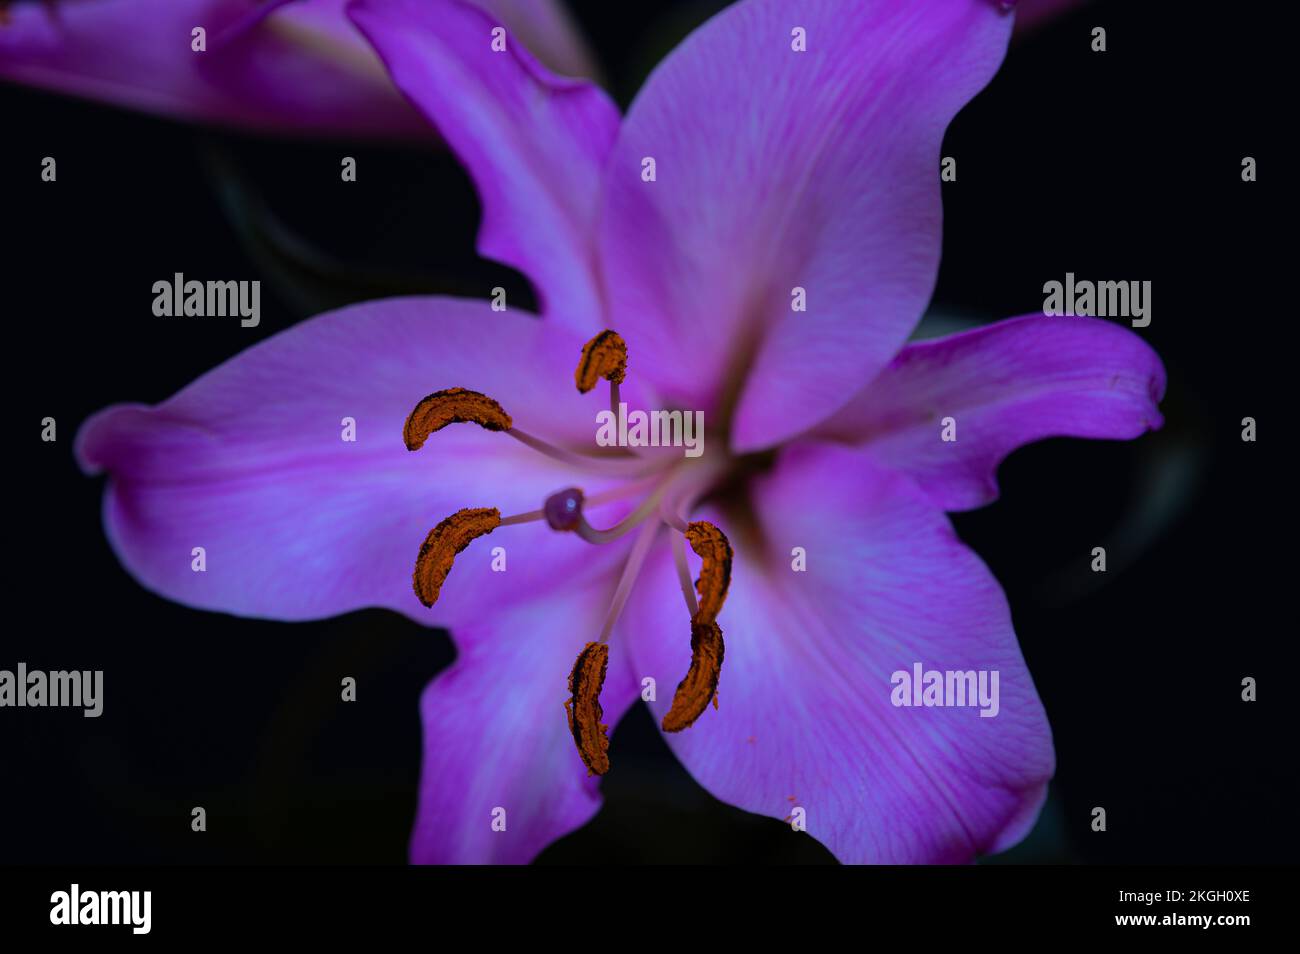 Purple and pink lily flowers on black background. Close up. Stock Photo